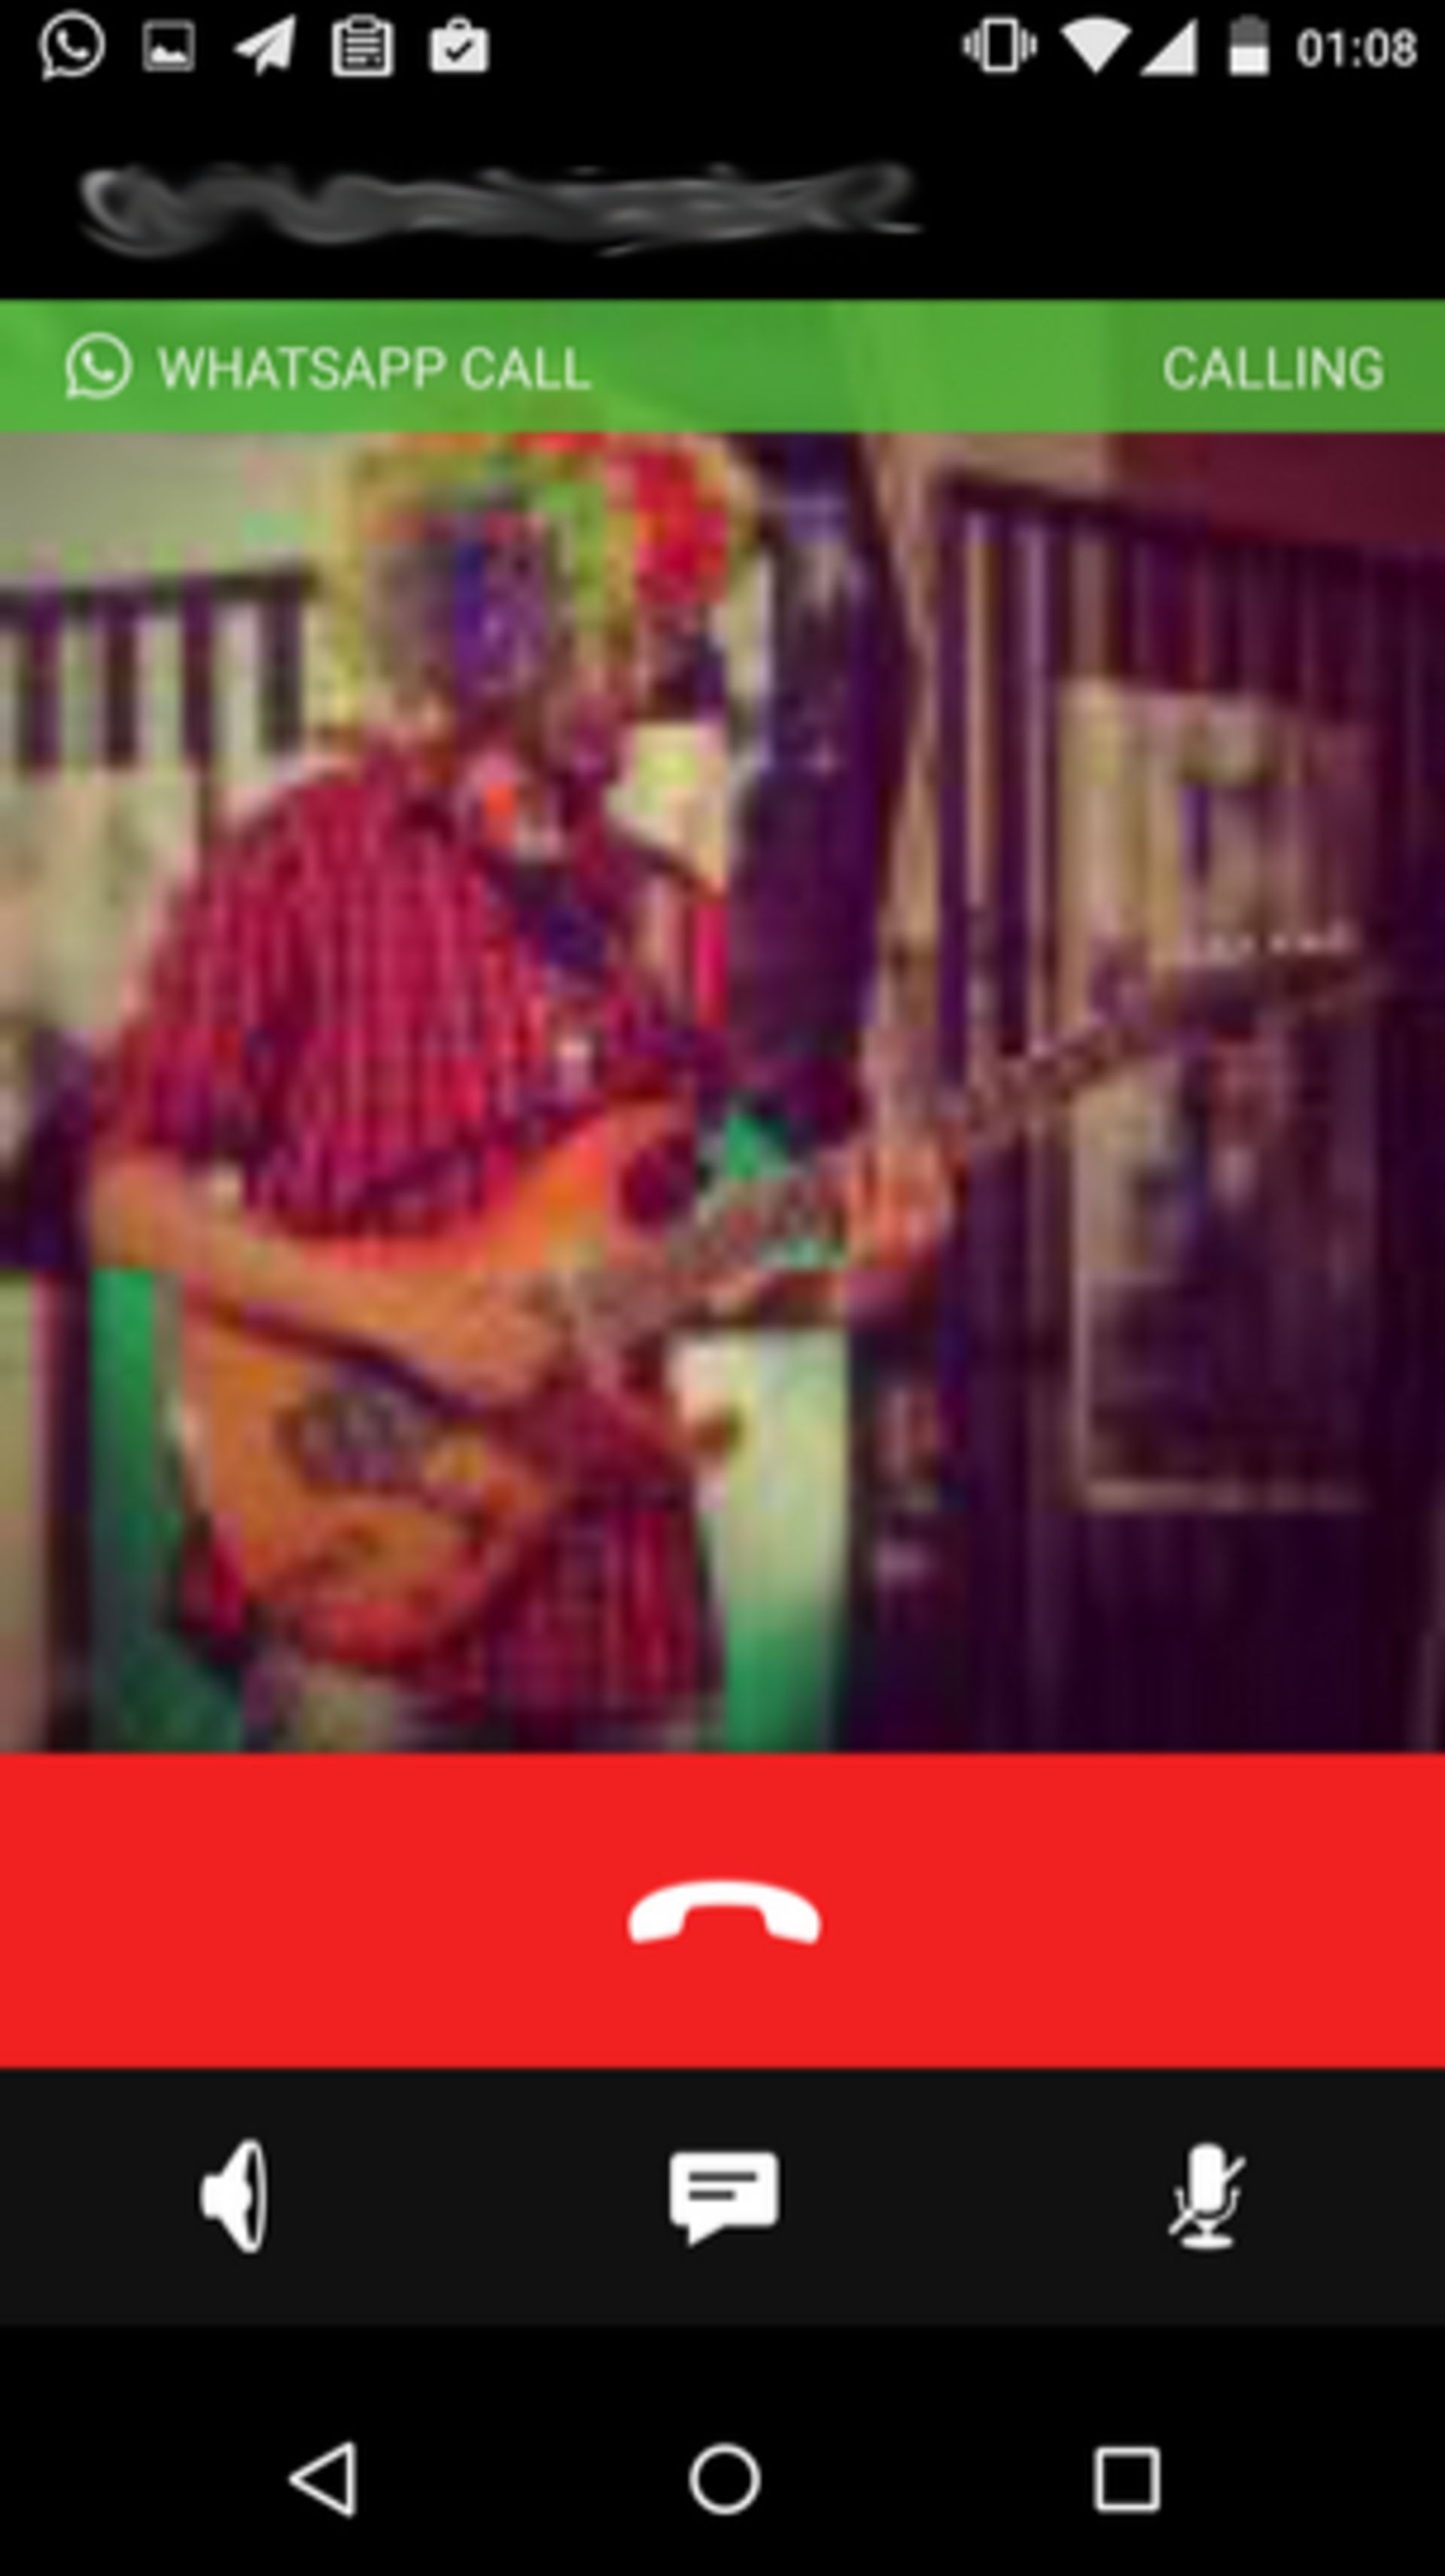 Screenshots-showing-the-new-WhatsApp-UI-with-voice-call-feature 2